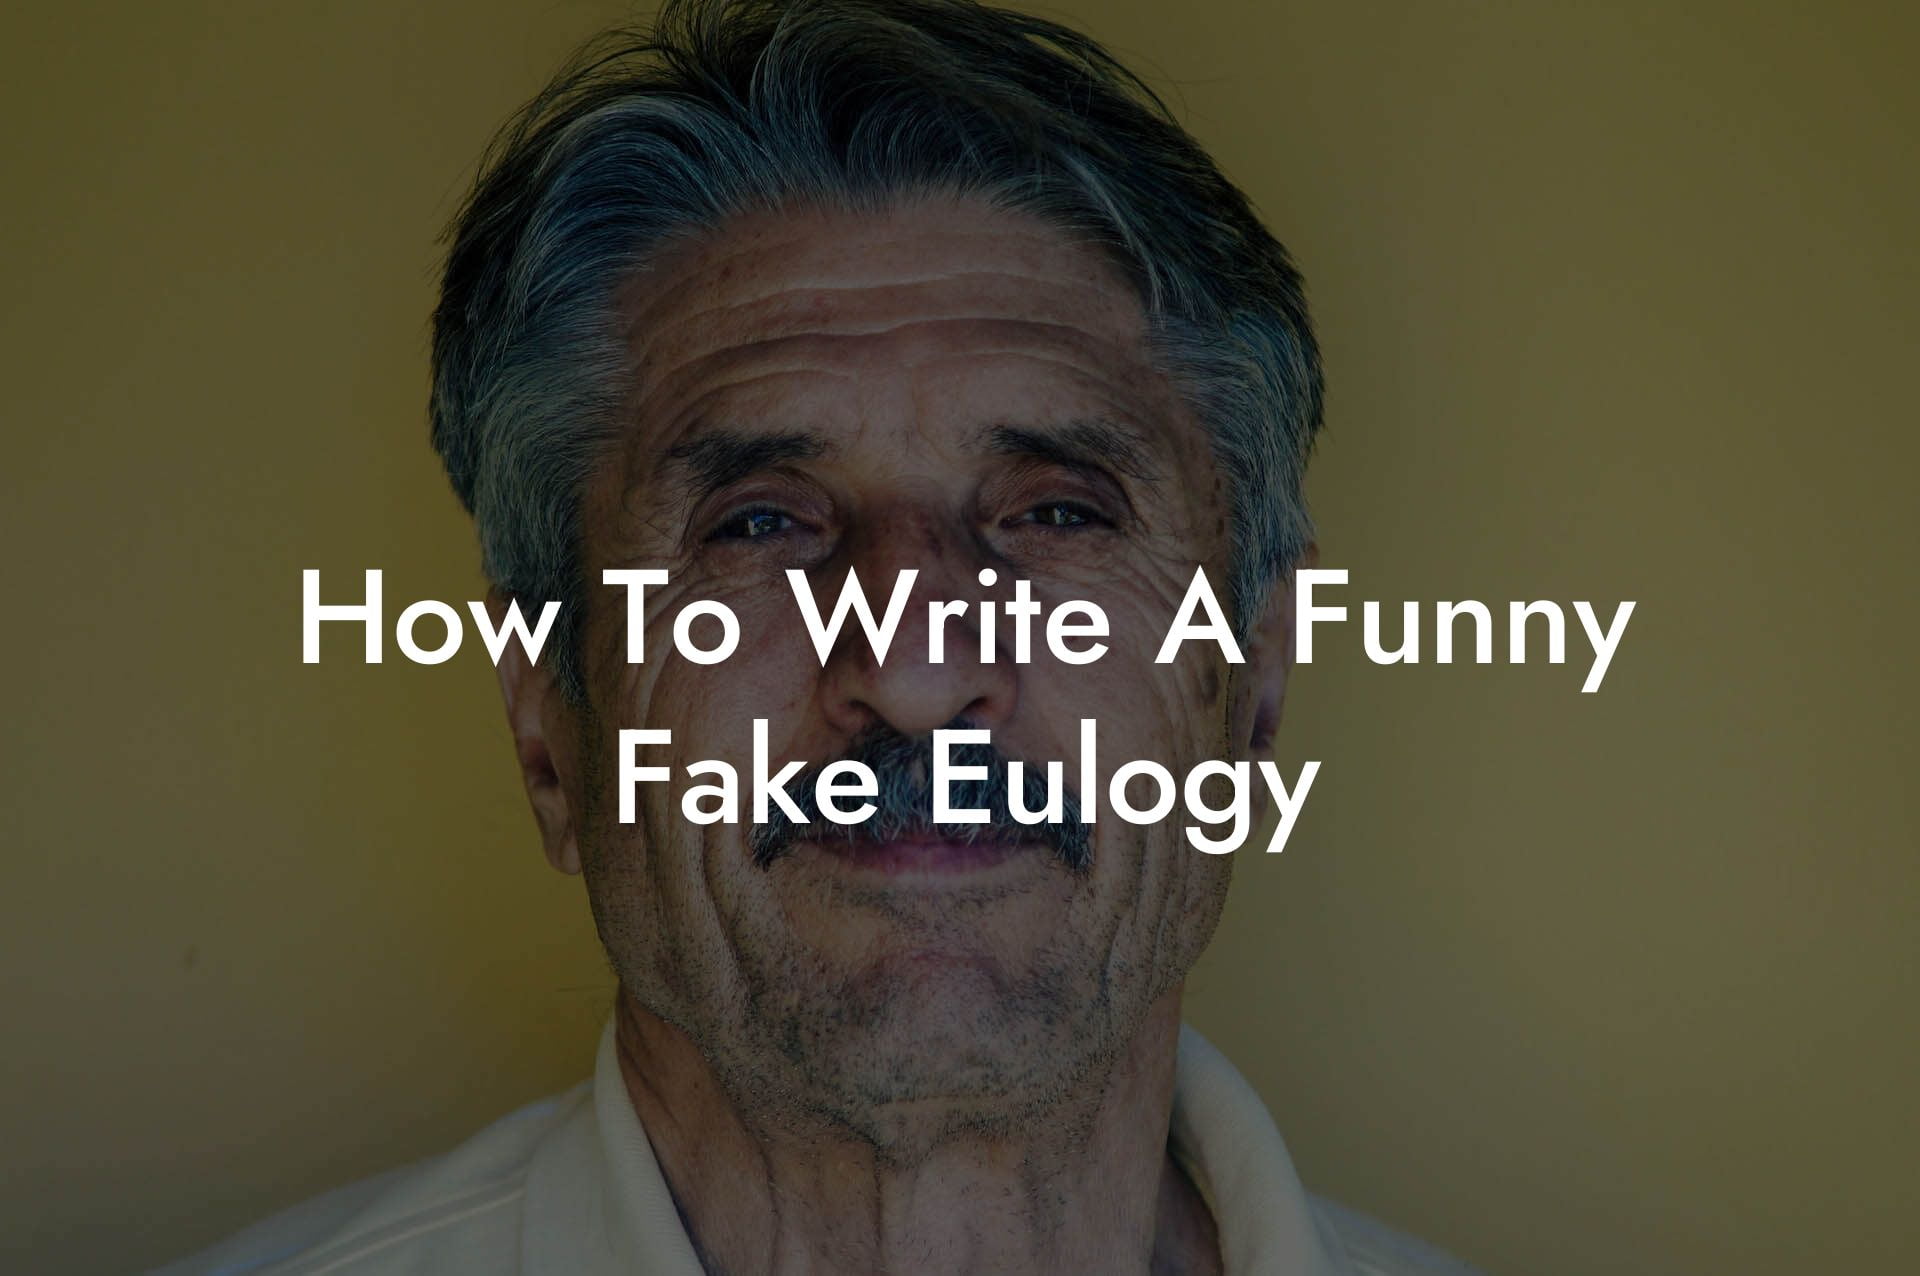 How To Write A Funny Fake Eulogy